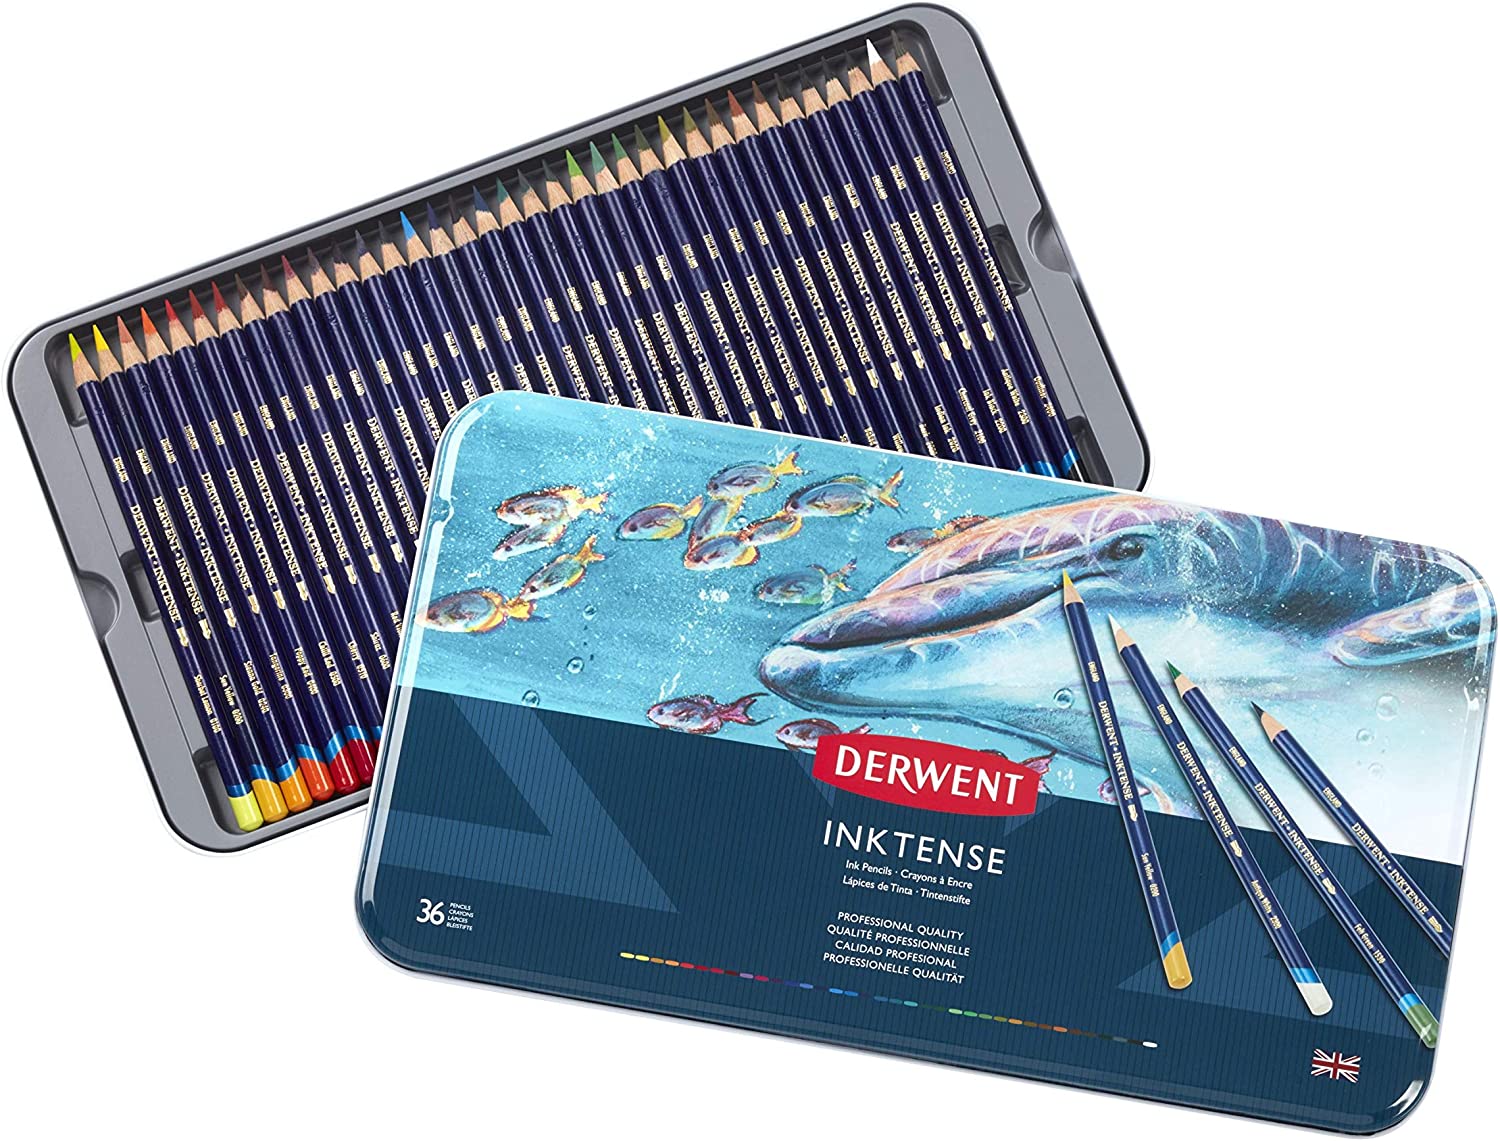 Derwent Inktense Pencils Tin Set of 36 - an ideal holiday gift! Firm-textured, water-soluble, and versatile for watercolor, drawing, and coloring.